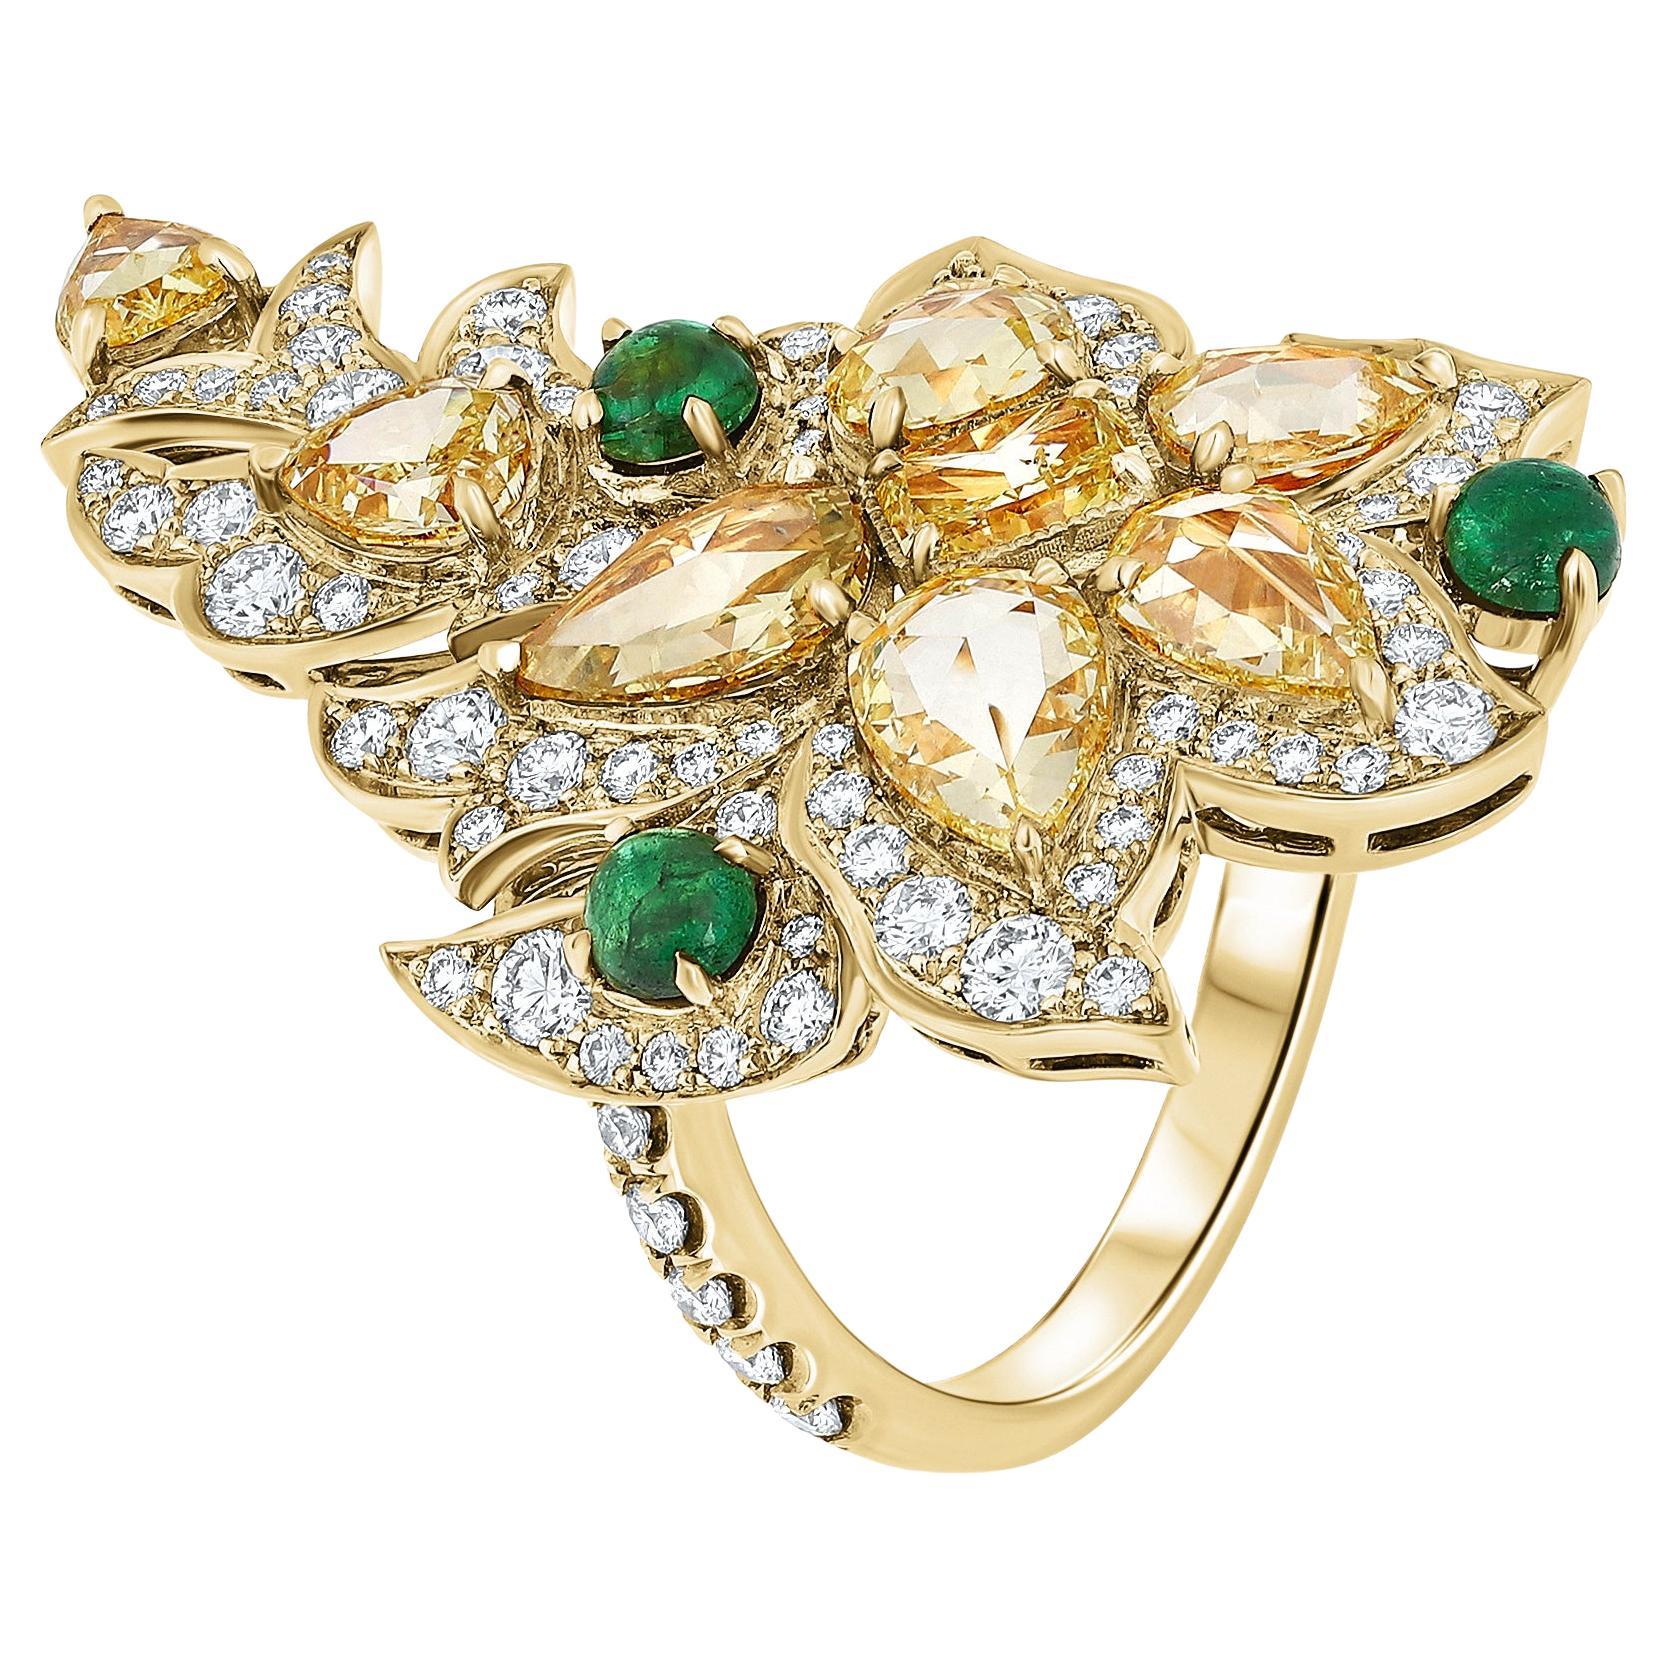 6 Carat Yellow Diamonds, Emerald and diamonds Cluster Ring Set in 18k Gold. For Sale